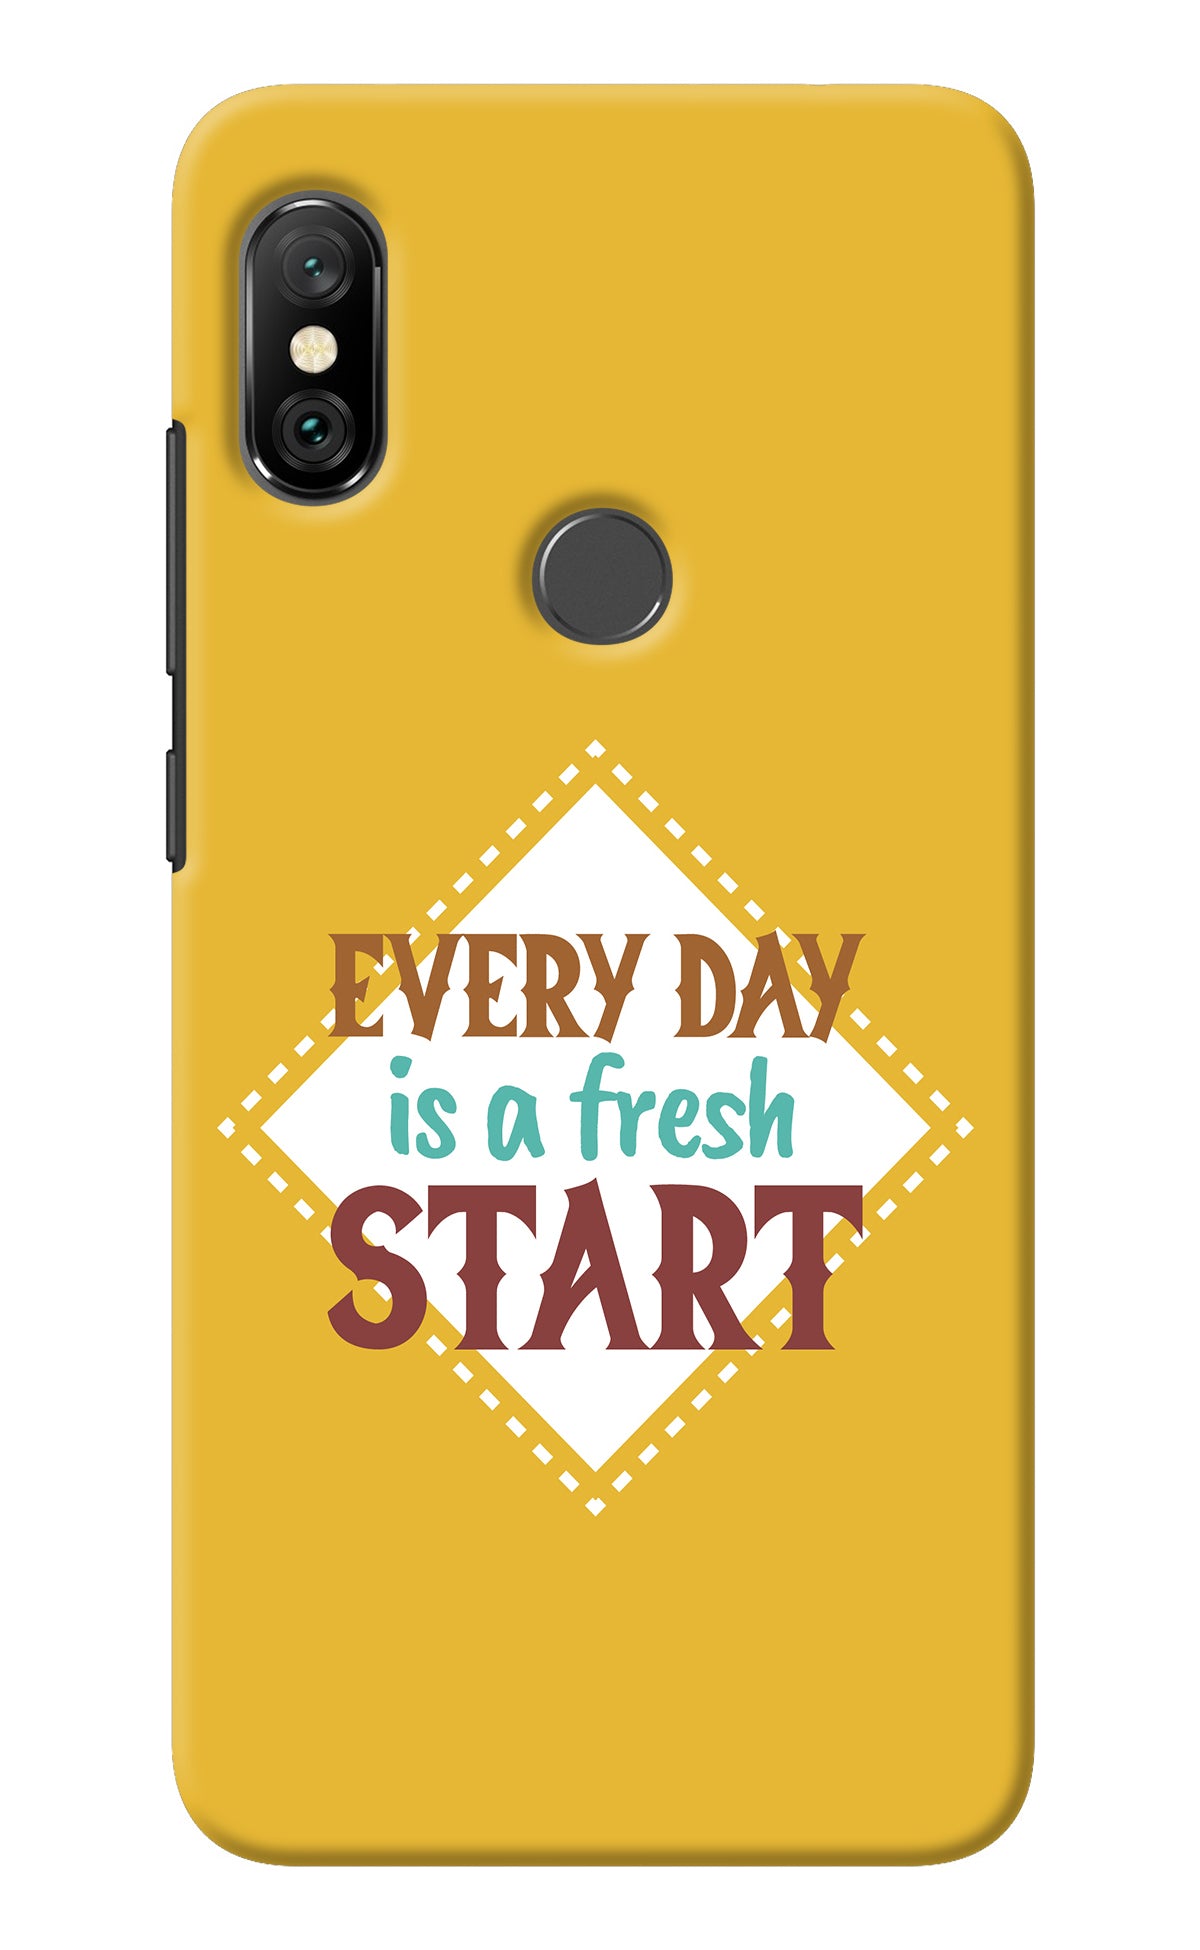 Every day is a Fresh Start Redmi Note 6 Pro Back Cover